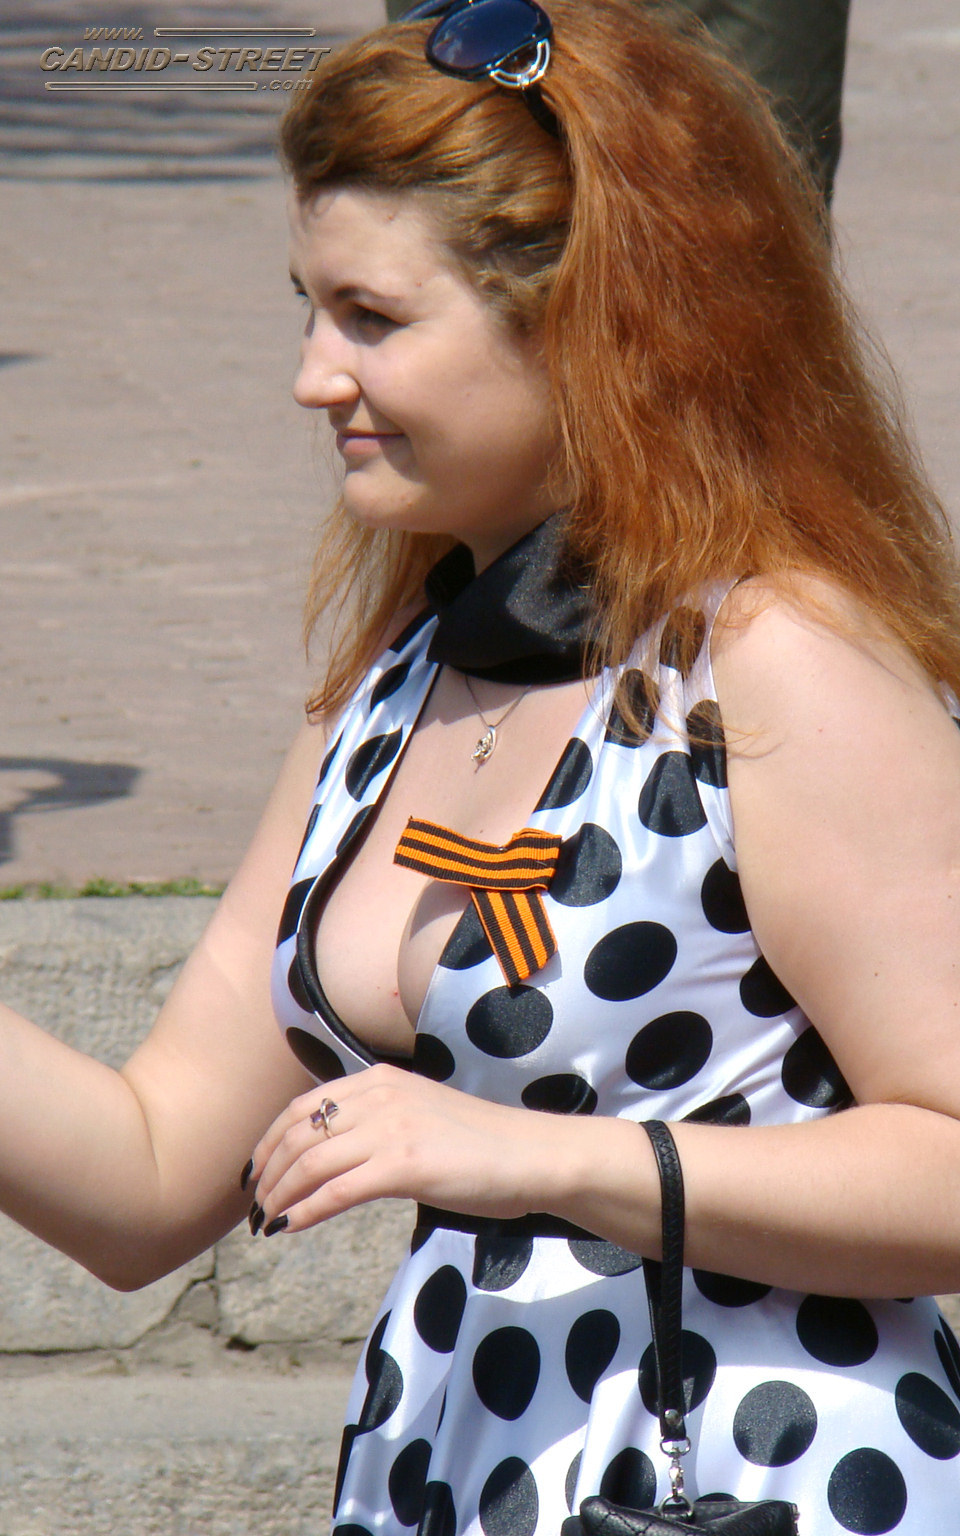 Busty girls candid shots - 07-dsc06291 from Candid Street